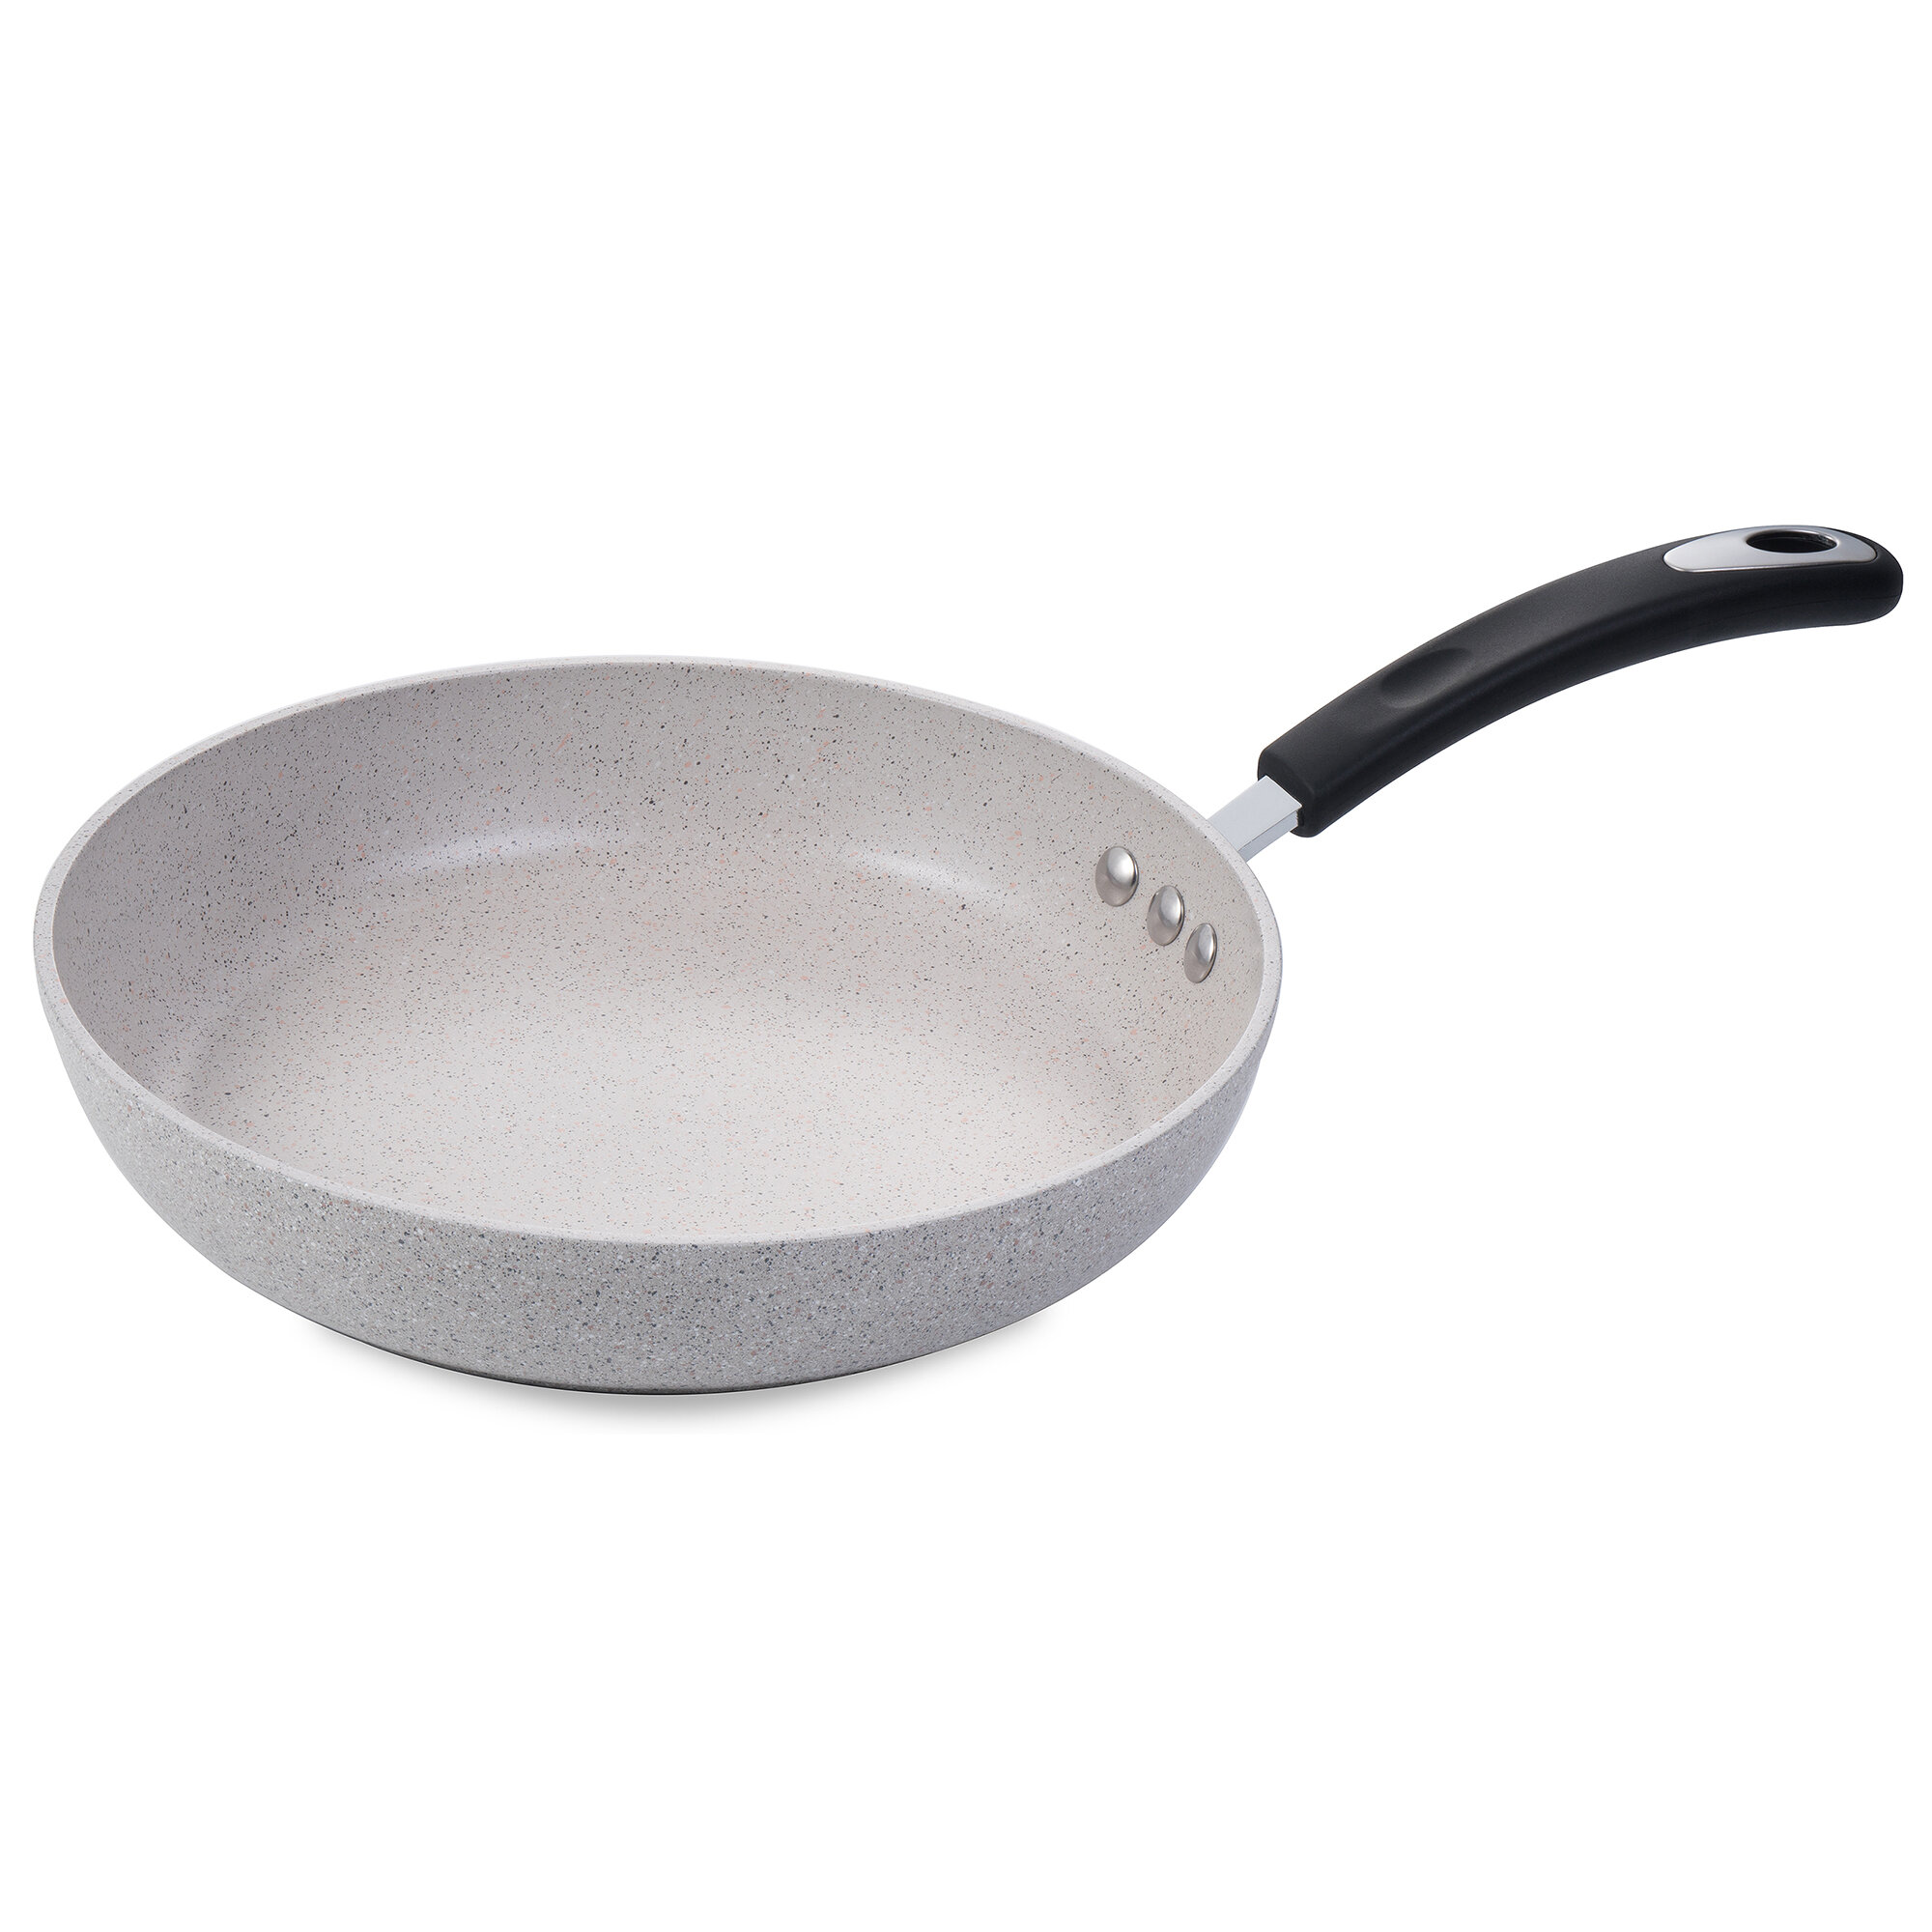 Granite Skillet APEO & Nonstick Frying Pan 8 Inch With Lid Stone Earth Pan 